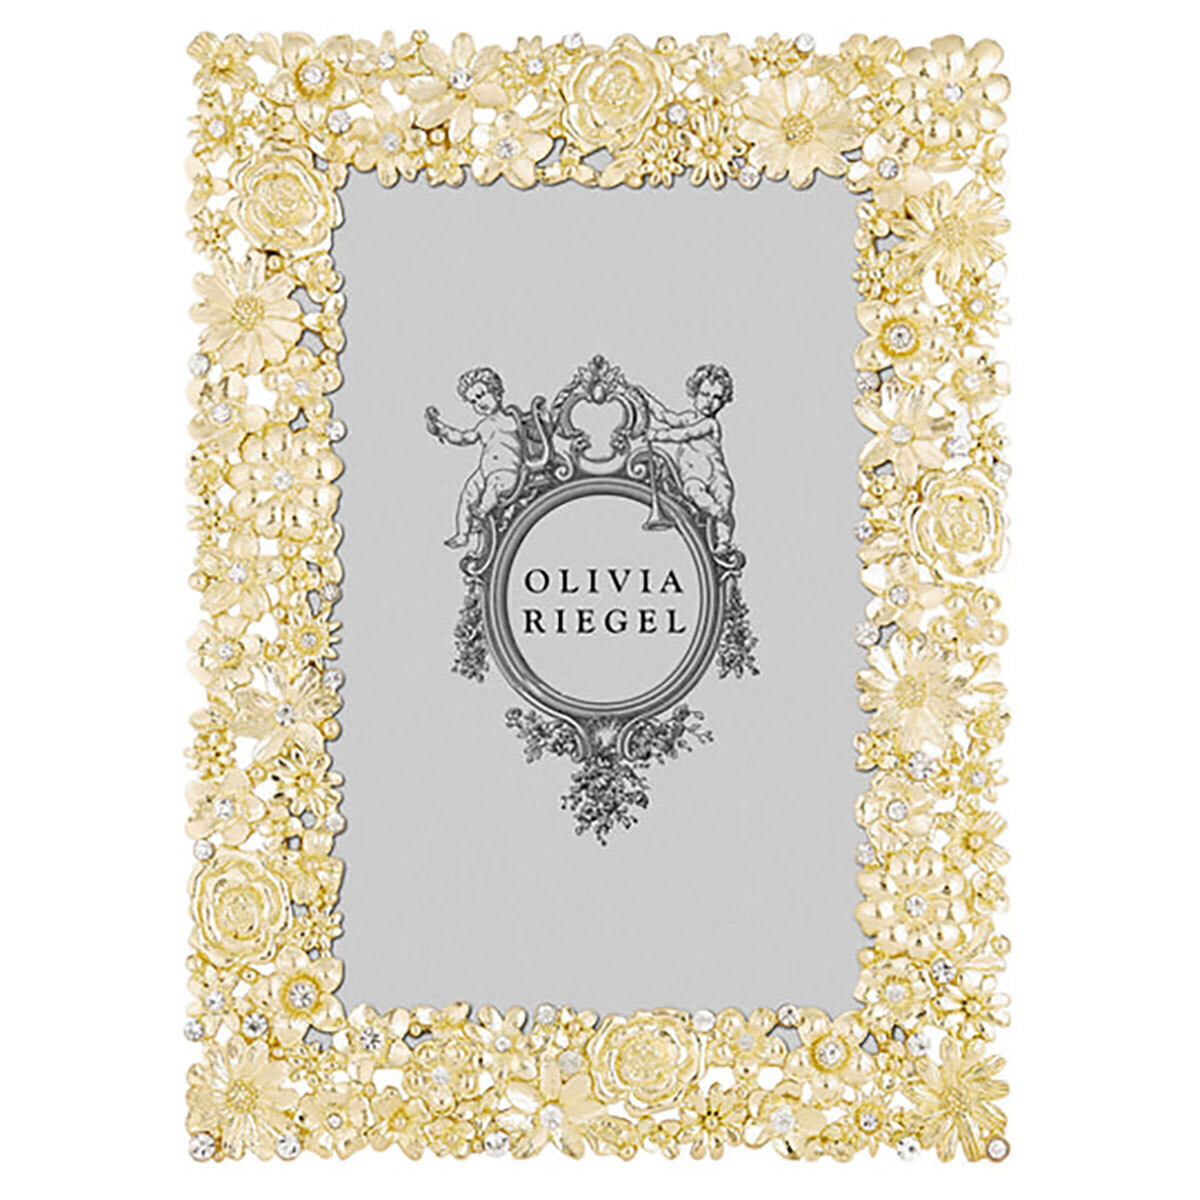 Olivia Riegel Gold Everleigh 5" x 7" Picture Frame RT4514